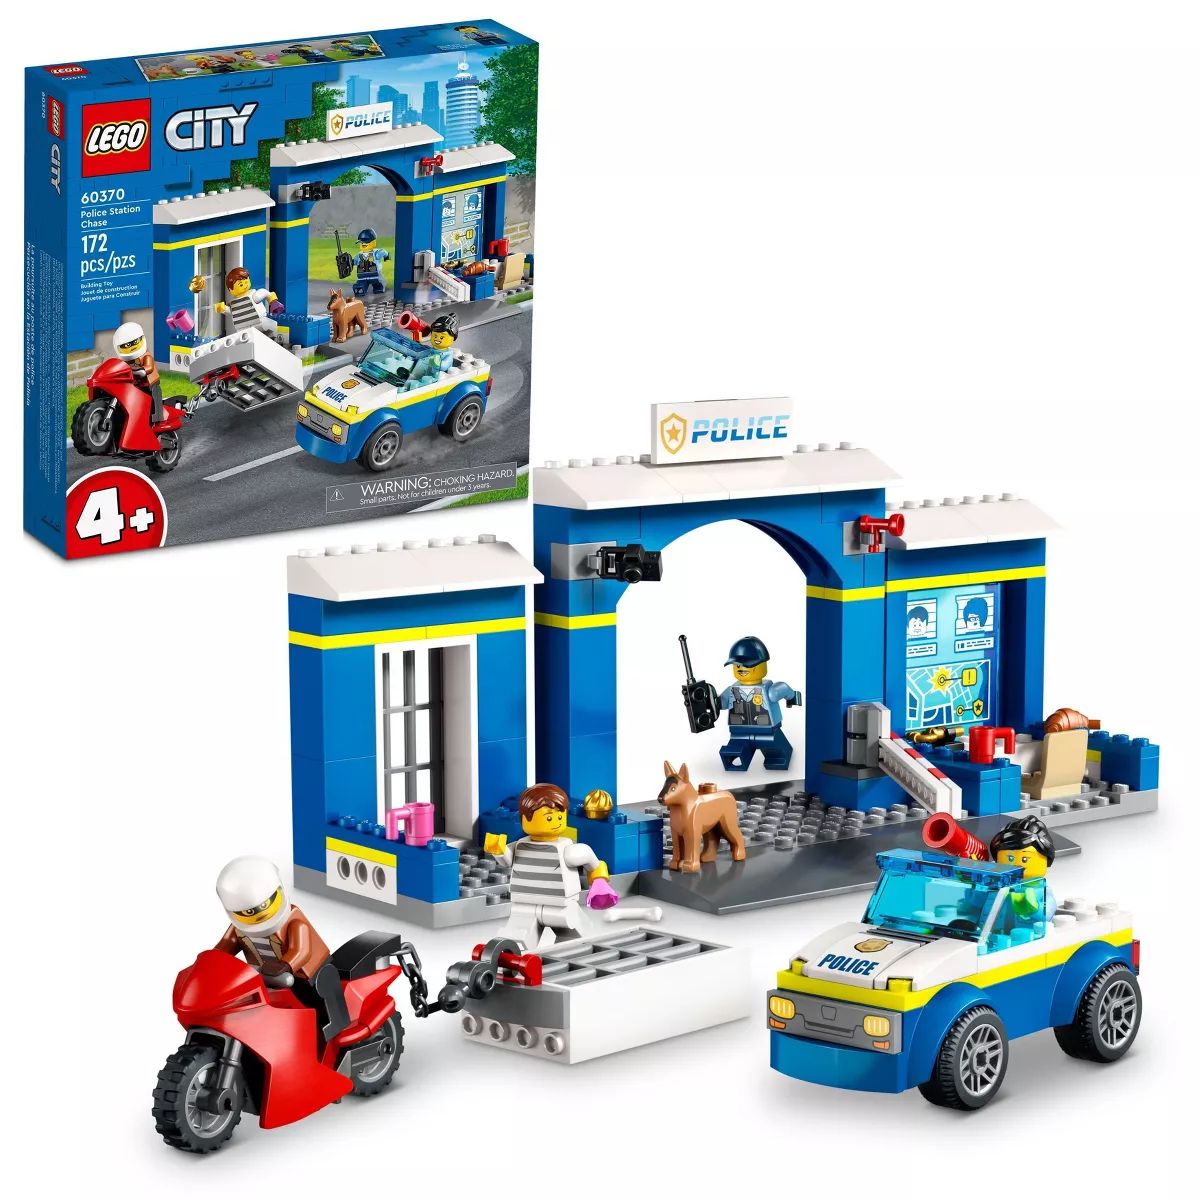 LEGO City Police Station Chase Set with Police Car Toy 60370 | Target